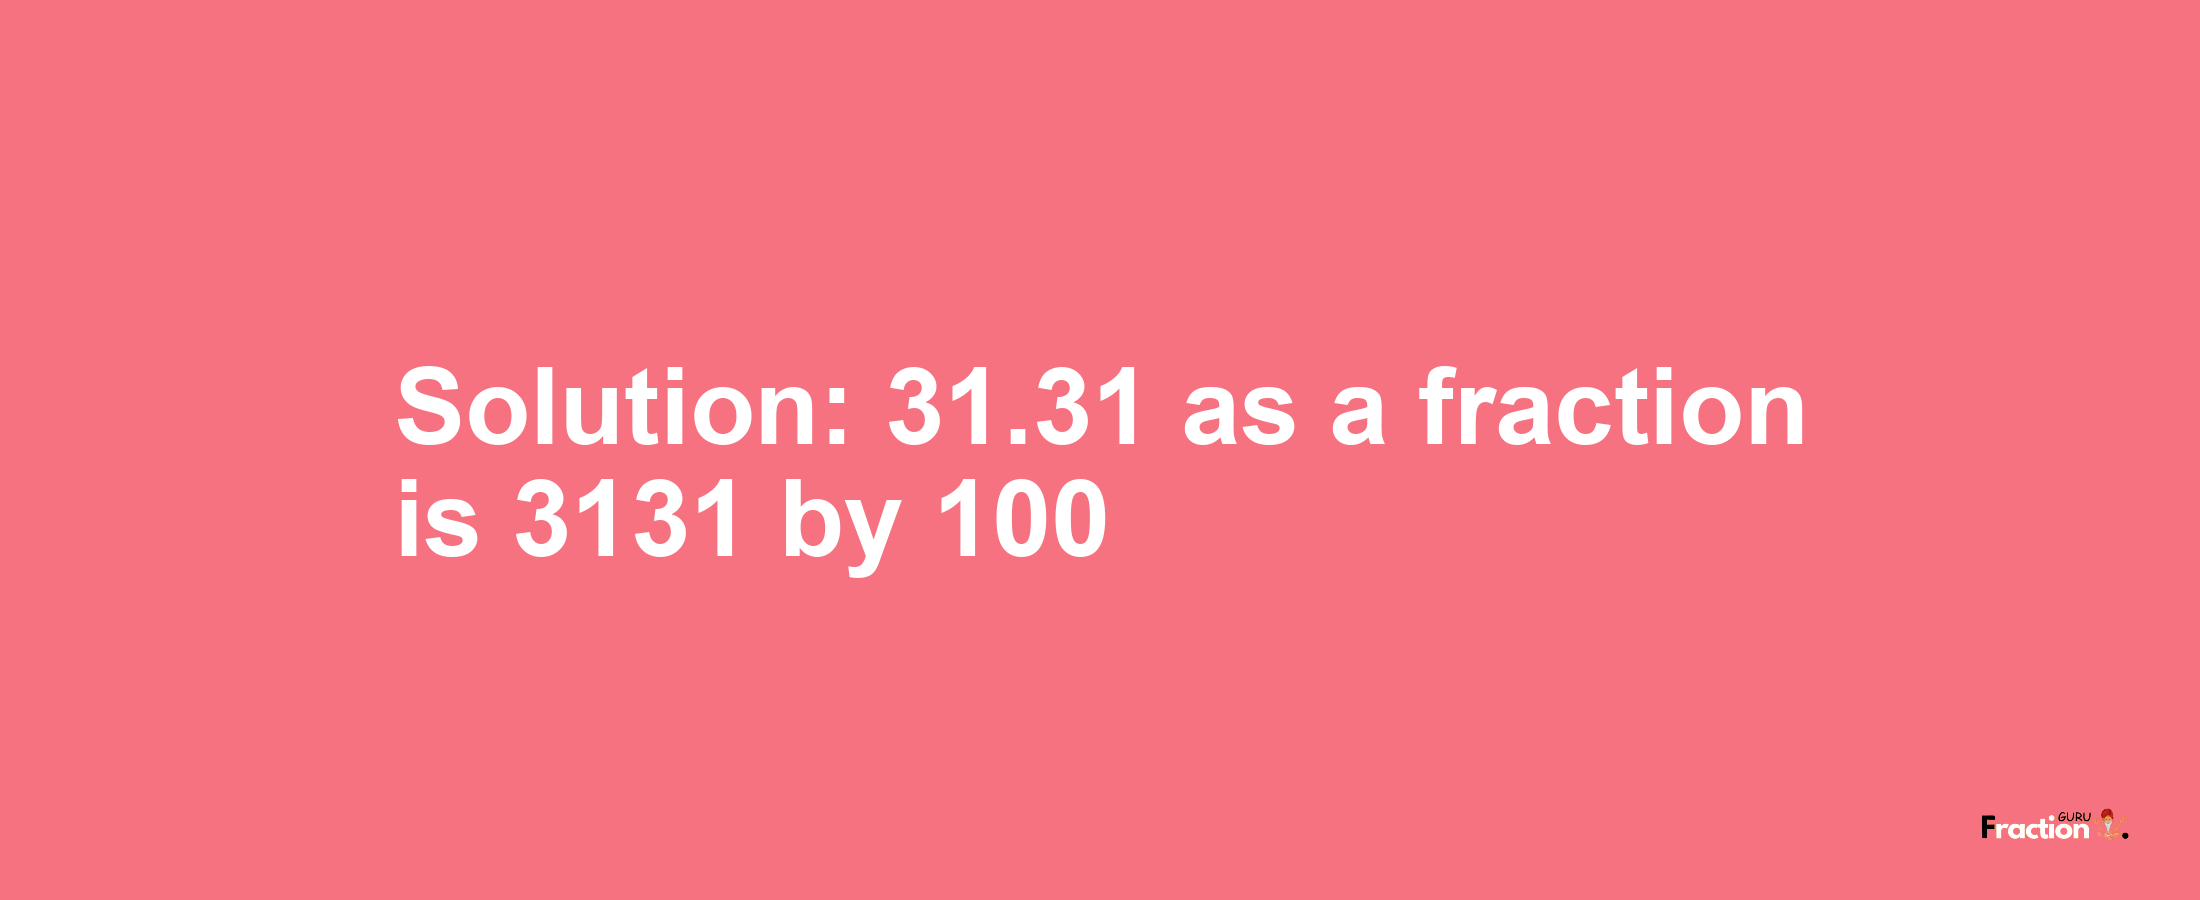 Solution:31.31 as a fraction is 3131/100